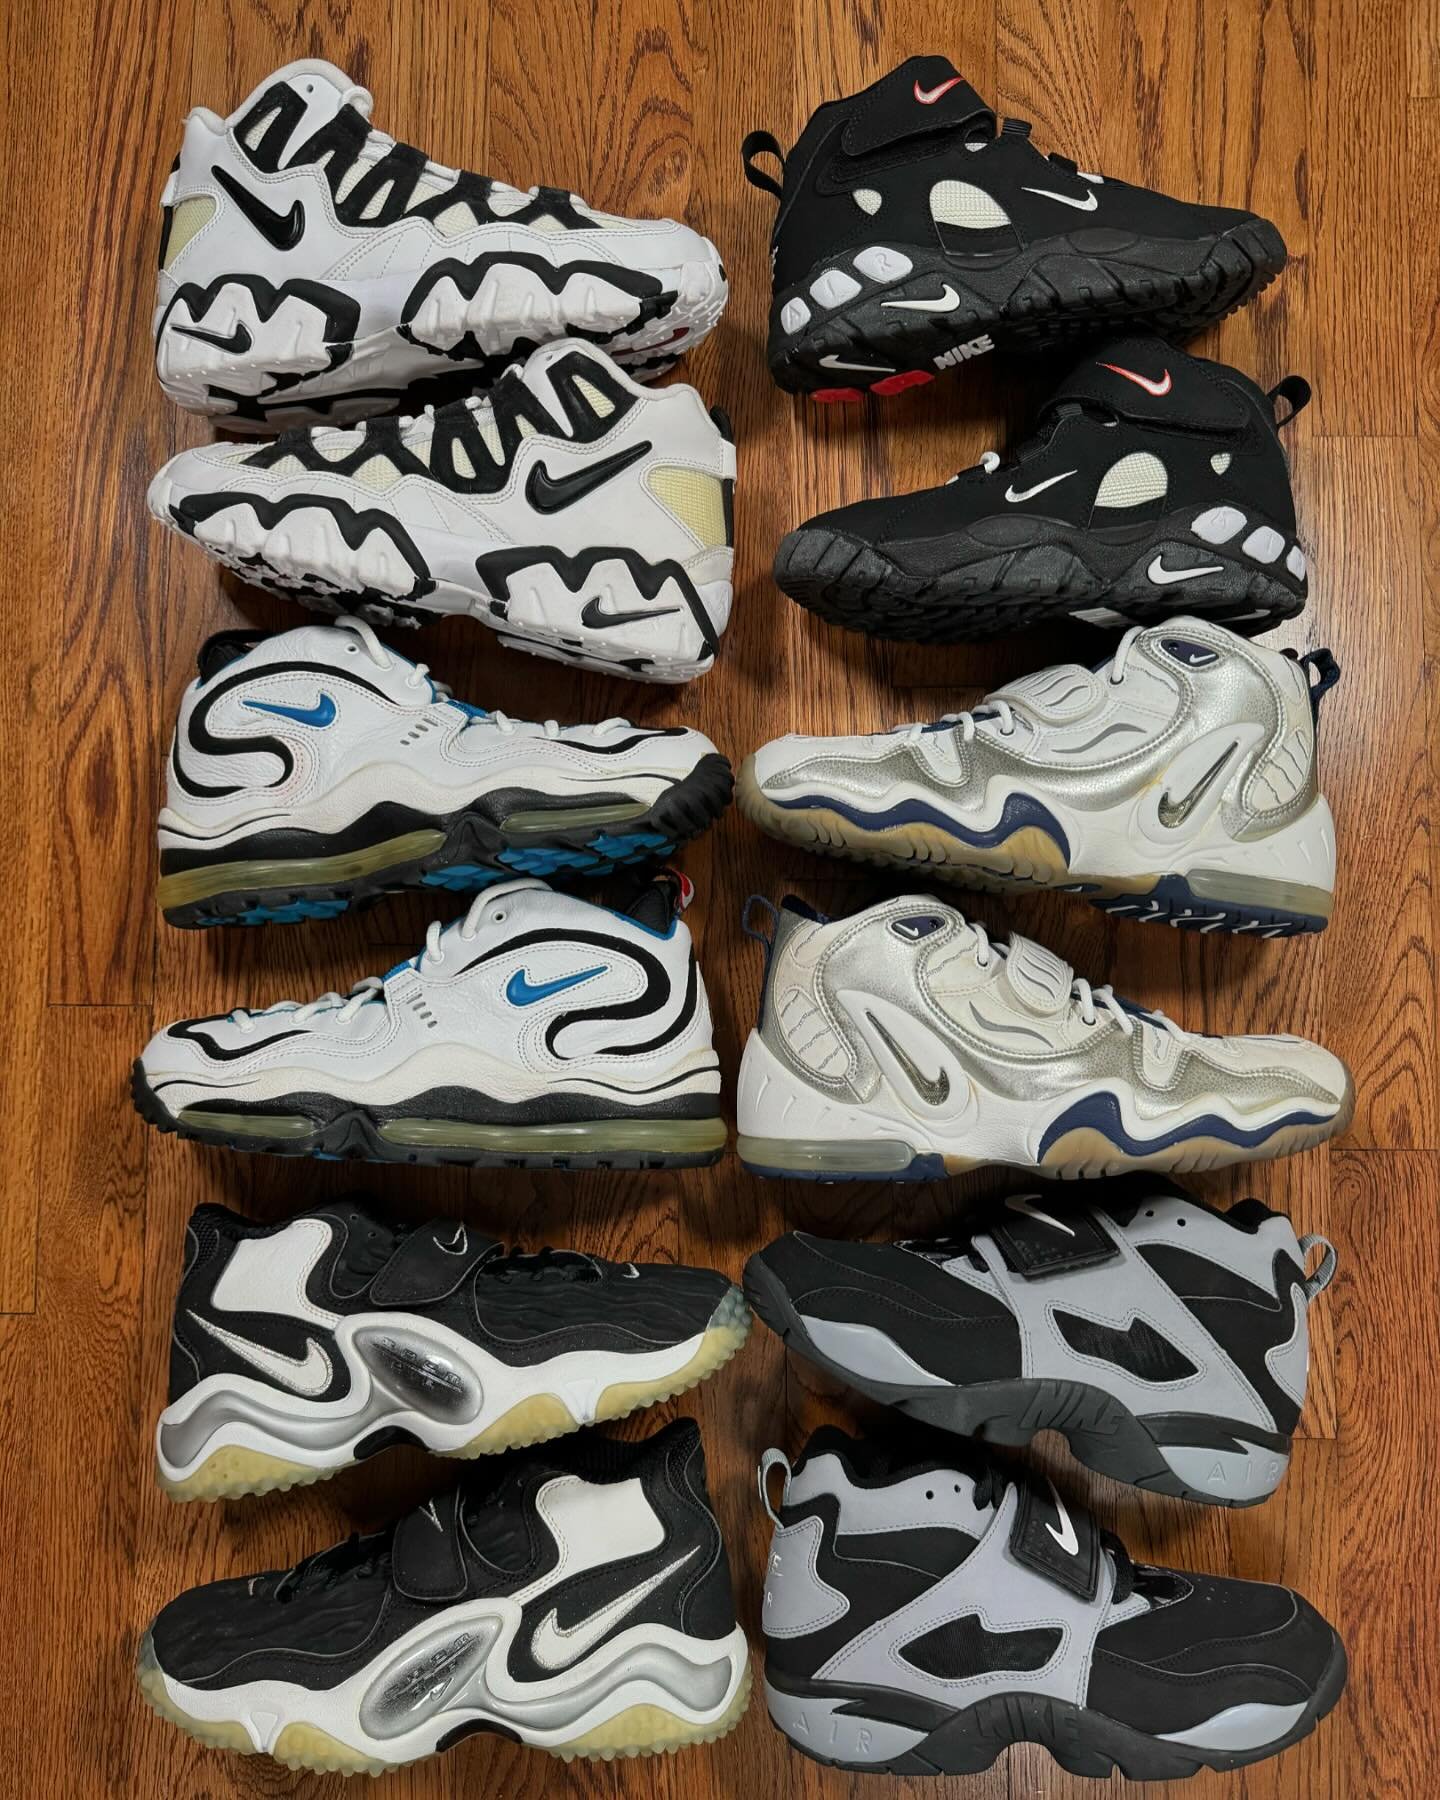 Some of our newly listed Nike Cross Trainers, signature models of Barry Sanders, Jerome Bettis and Deion Sanders.  All just listed, link in story.

#nikefootball #vintagenike #nikecrosstraining #nikebarrysanders #nikedeionsanders #nikejeromebettis #n